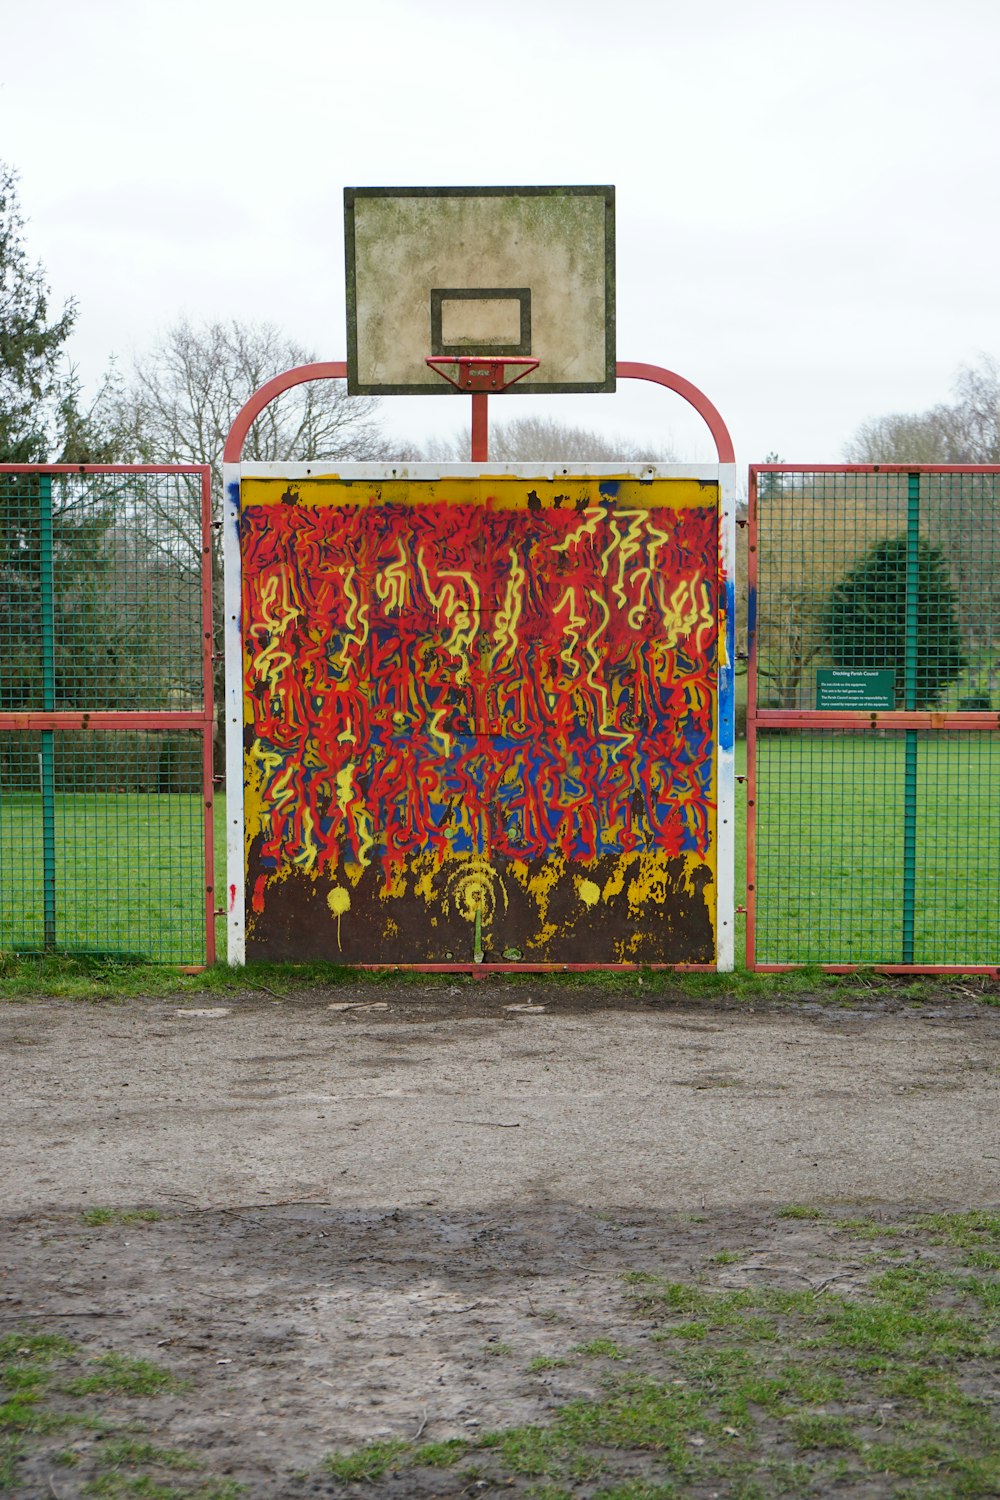 a basketball court with a painting on it